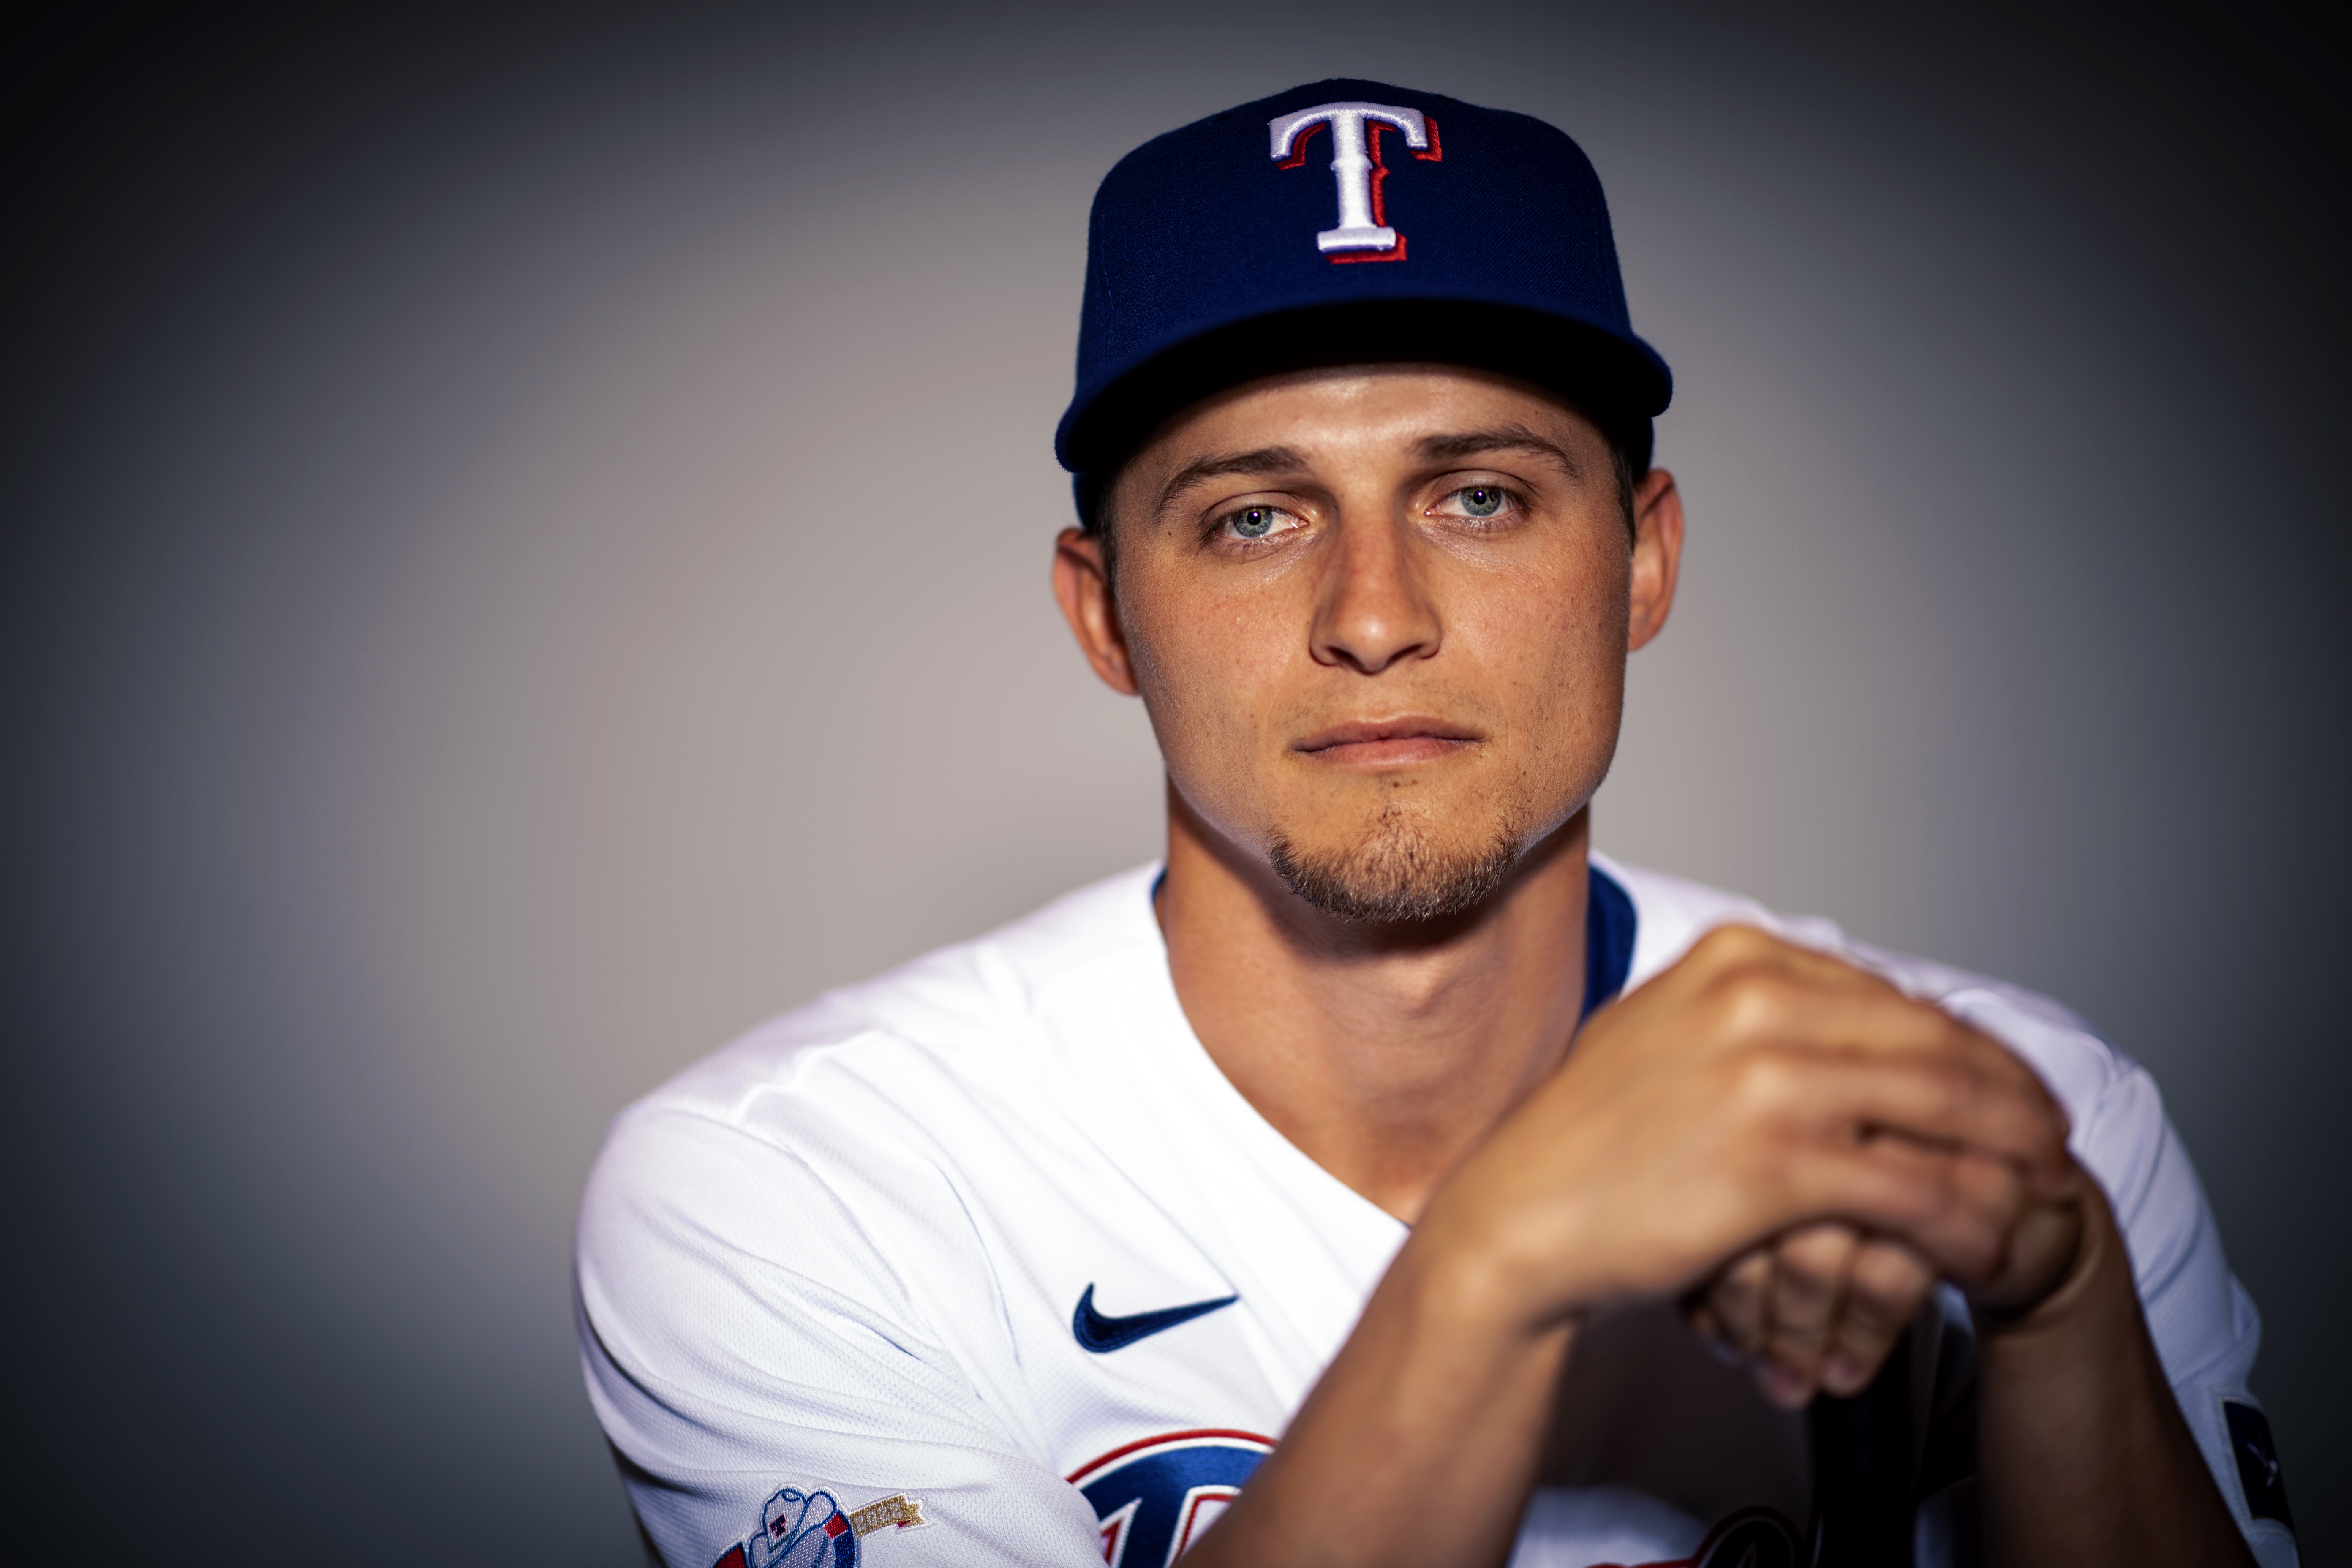 Dodgers vs. Rangers: Old friend Corey Seager faces his old team